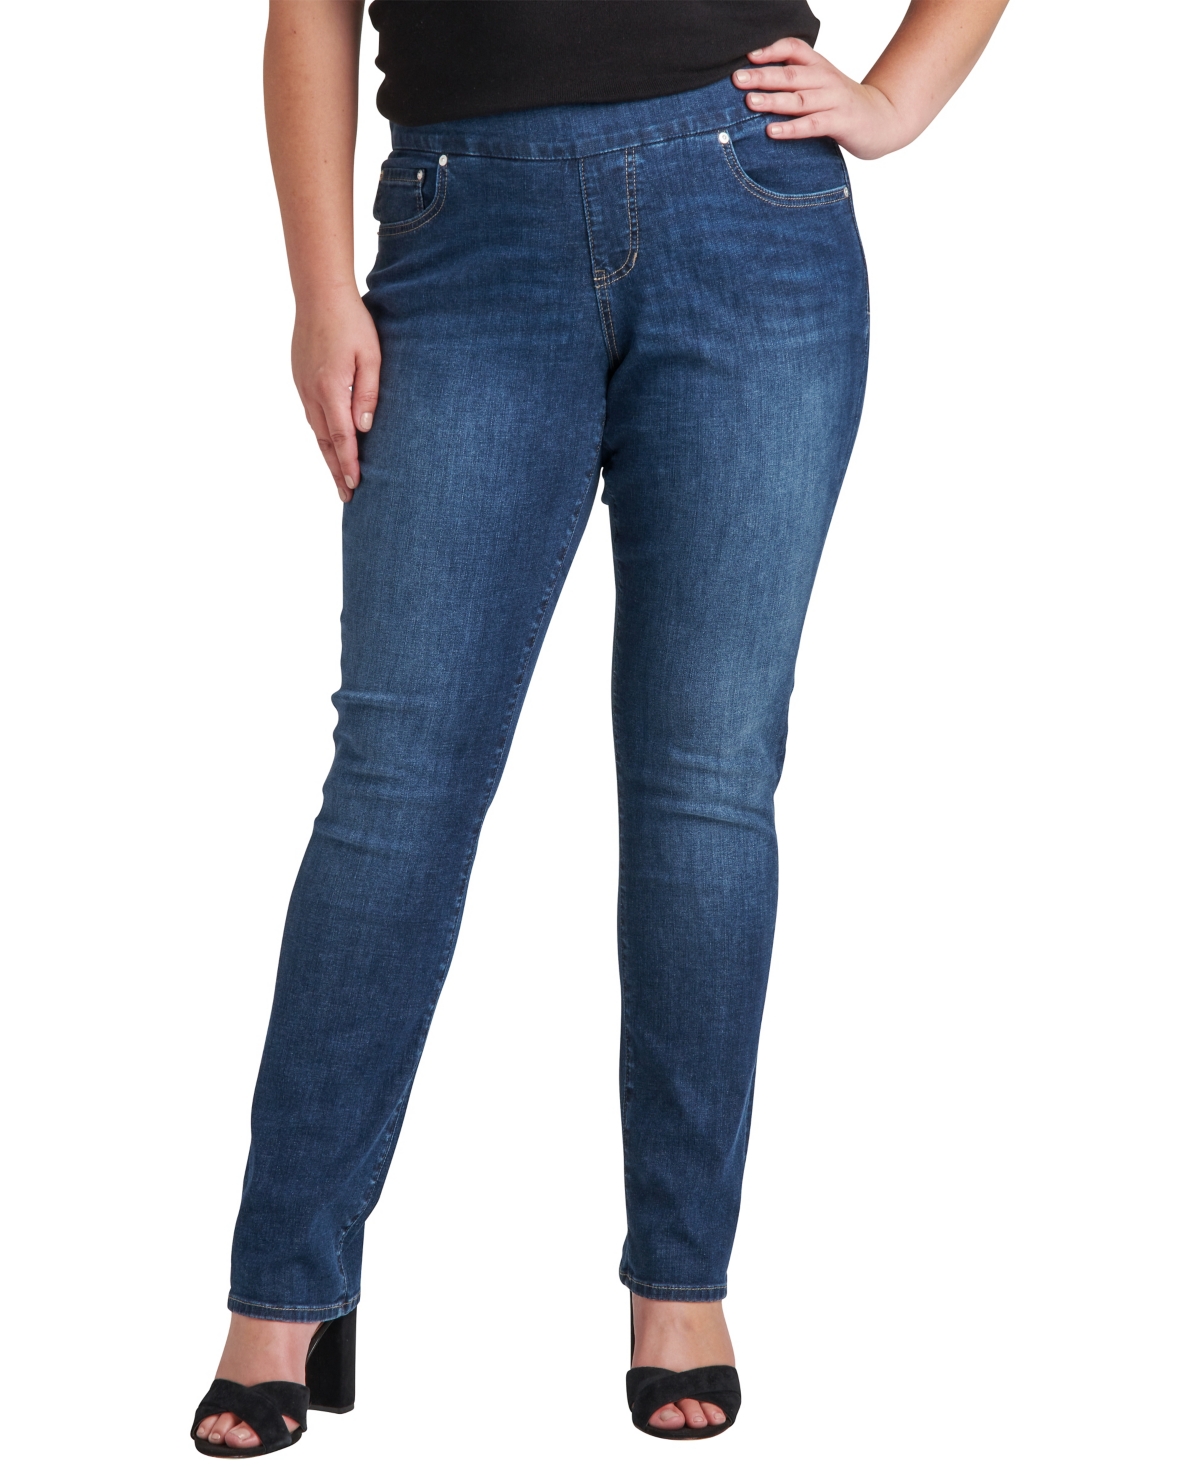 Plus Size Peri Mid Rise Straight Leg Pull-On Jeans - Anchor Blue